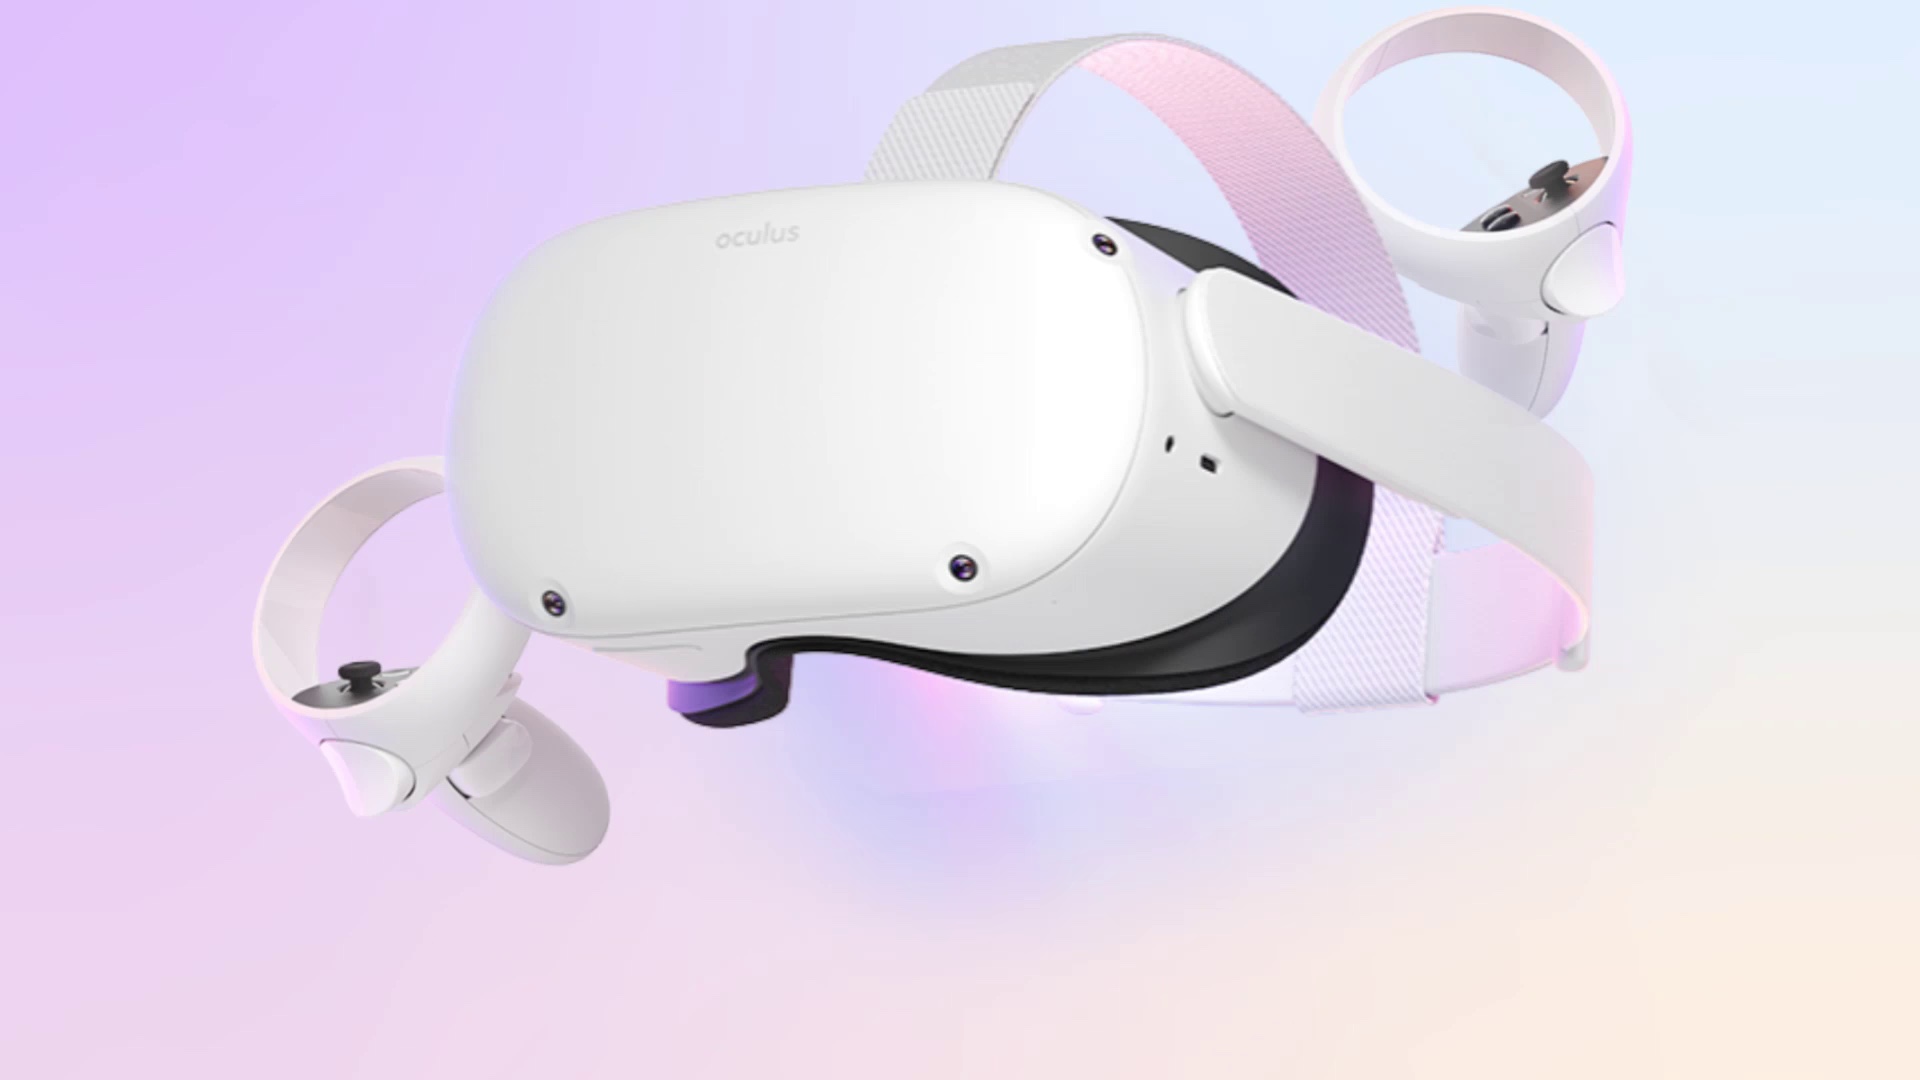 Rumor: Oculus Quest 3 will have the same design as the second version